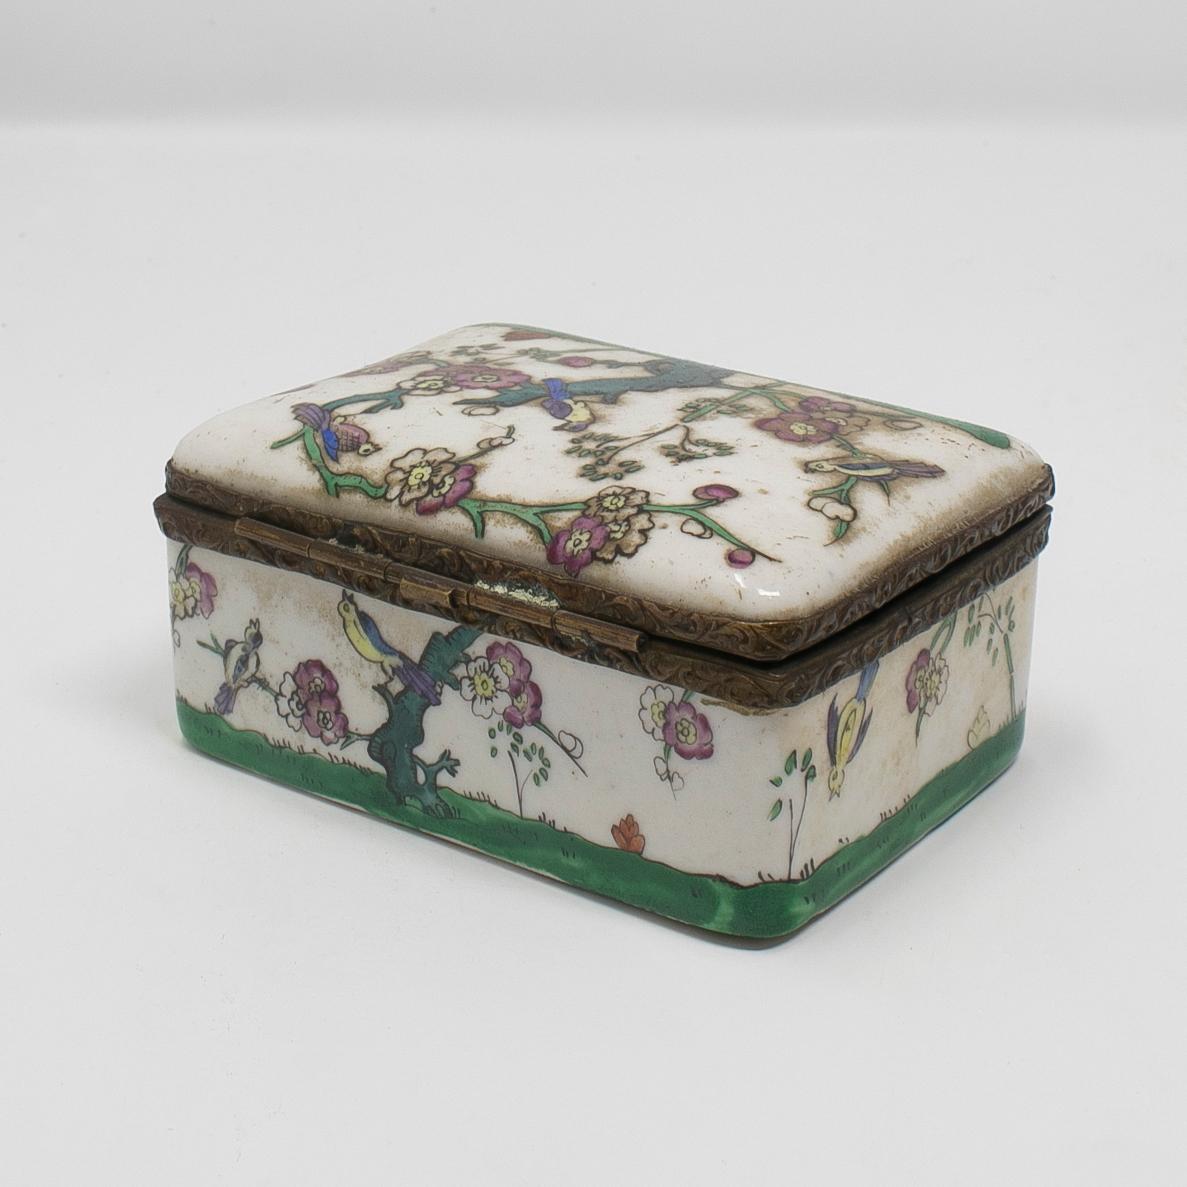 18th Century 19th Century French Porcelain and Brass Trinket Box with Flower Decorations For Sale